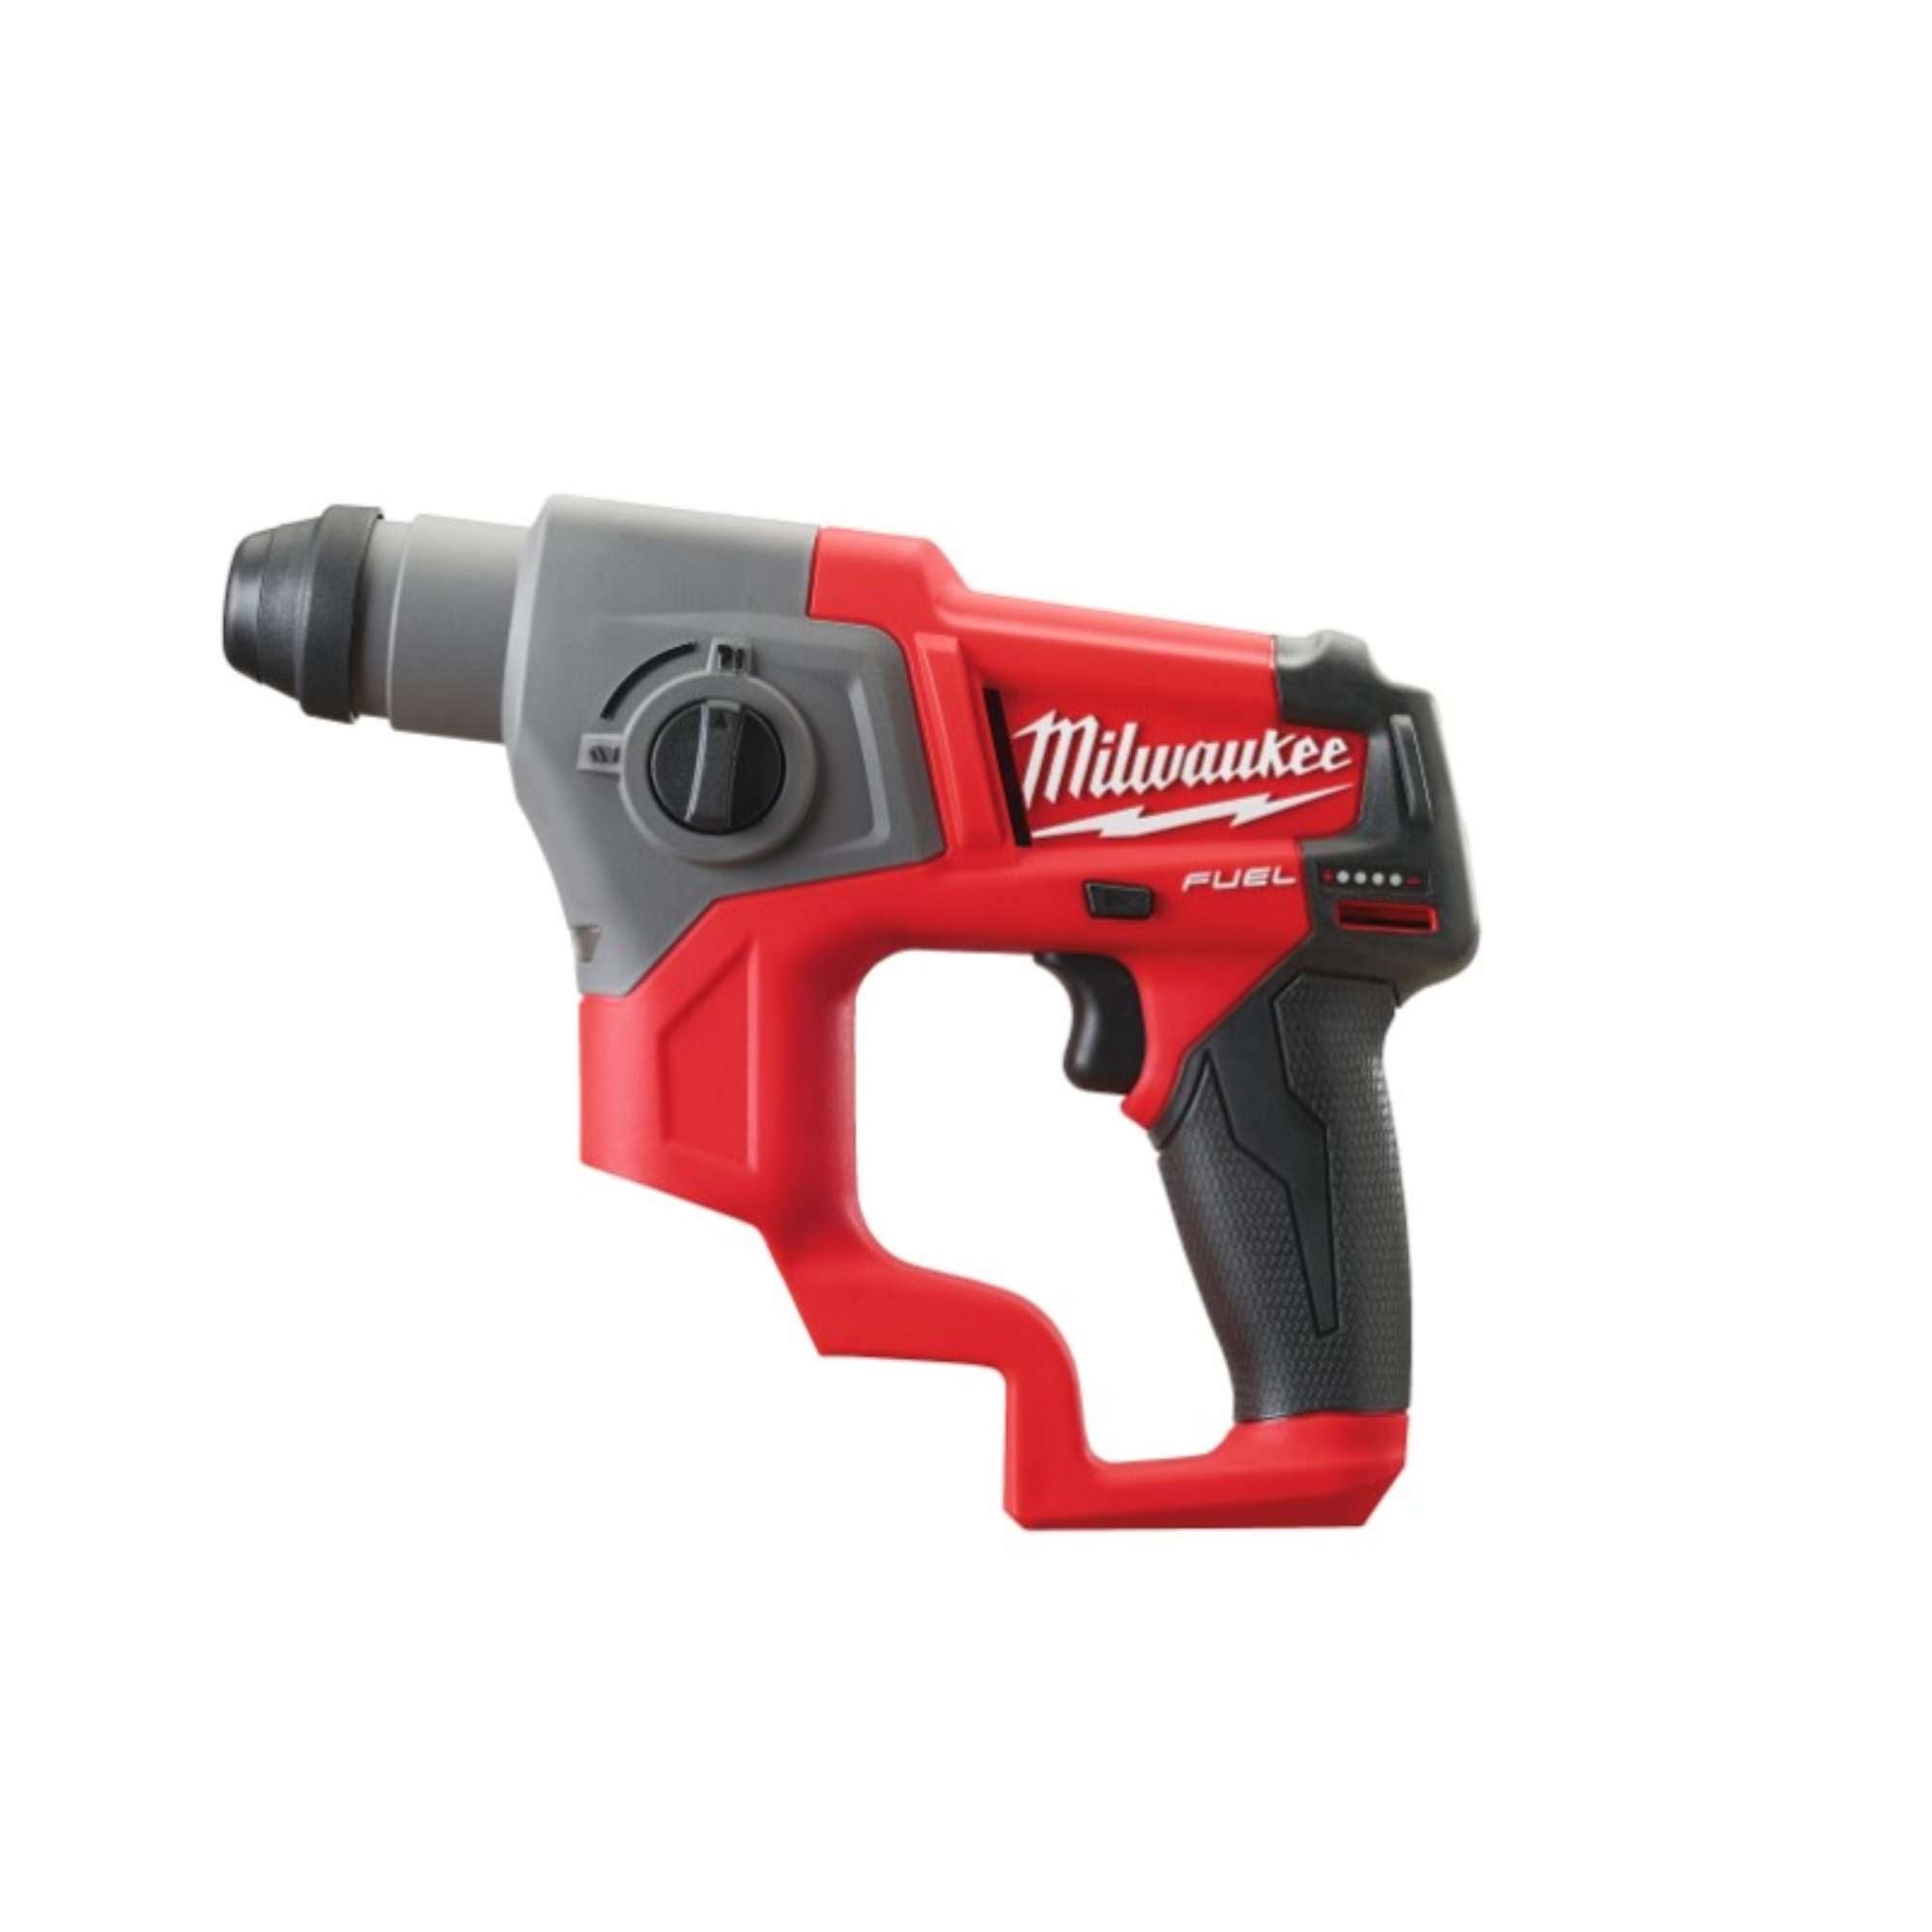 SDS-Plus M12 12V compact hammer drill - Milwaukee 4933441947